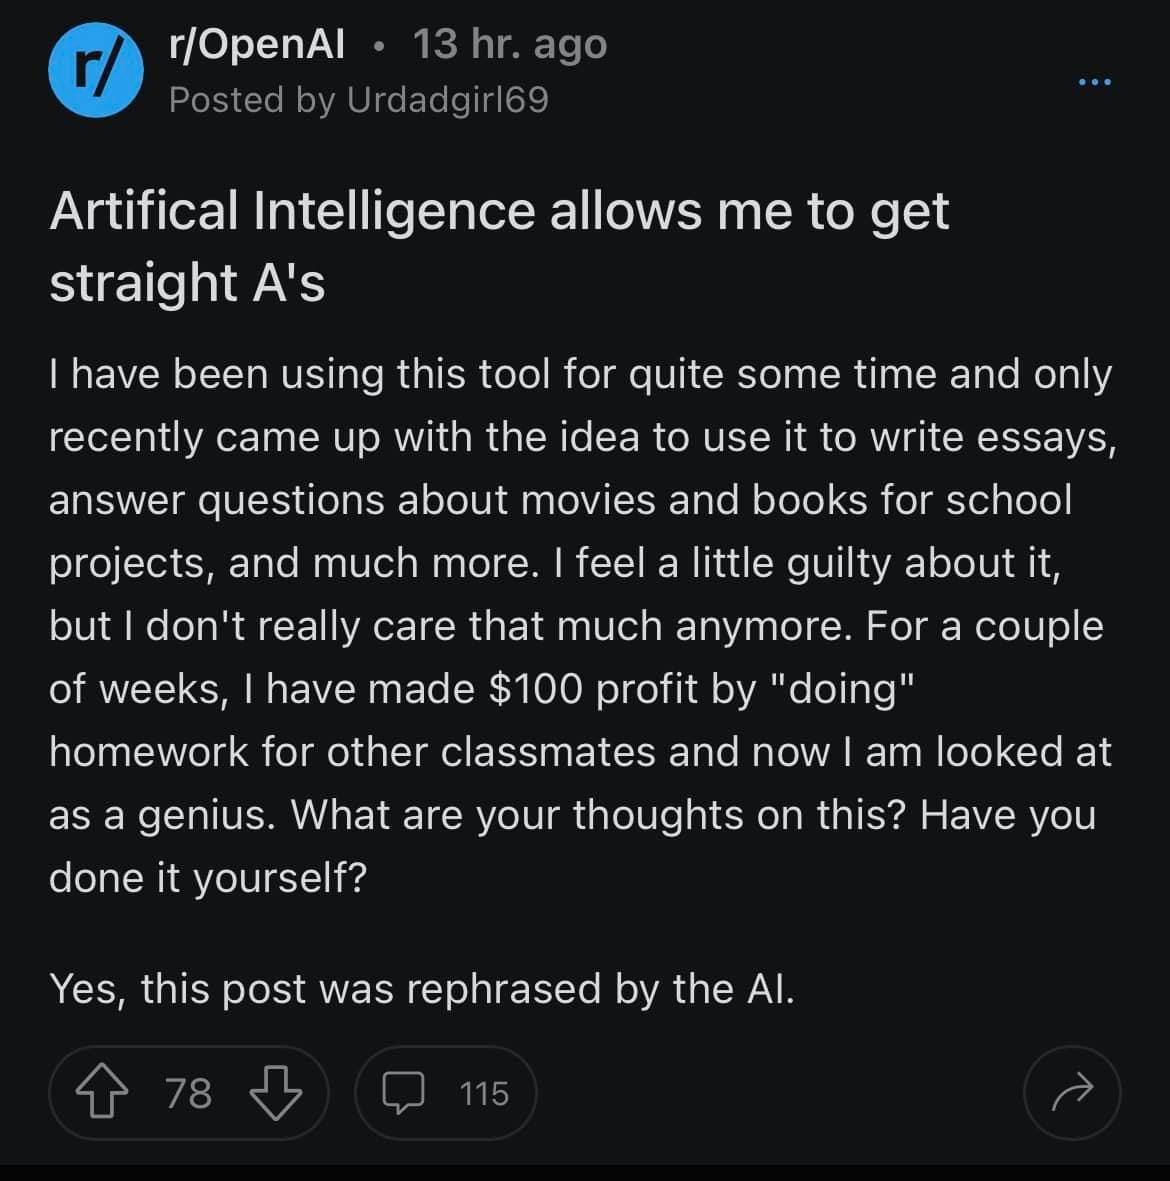 Reddit Post About Using ChatGPT on Essays